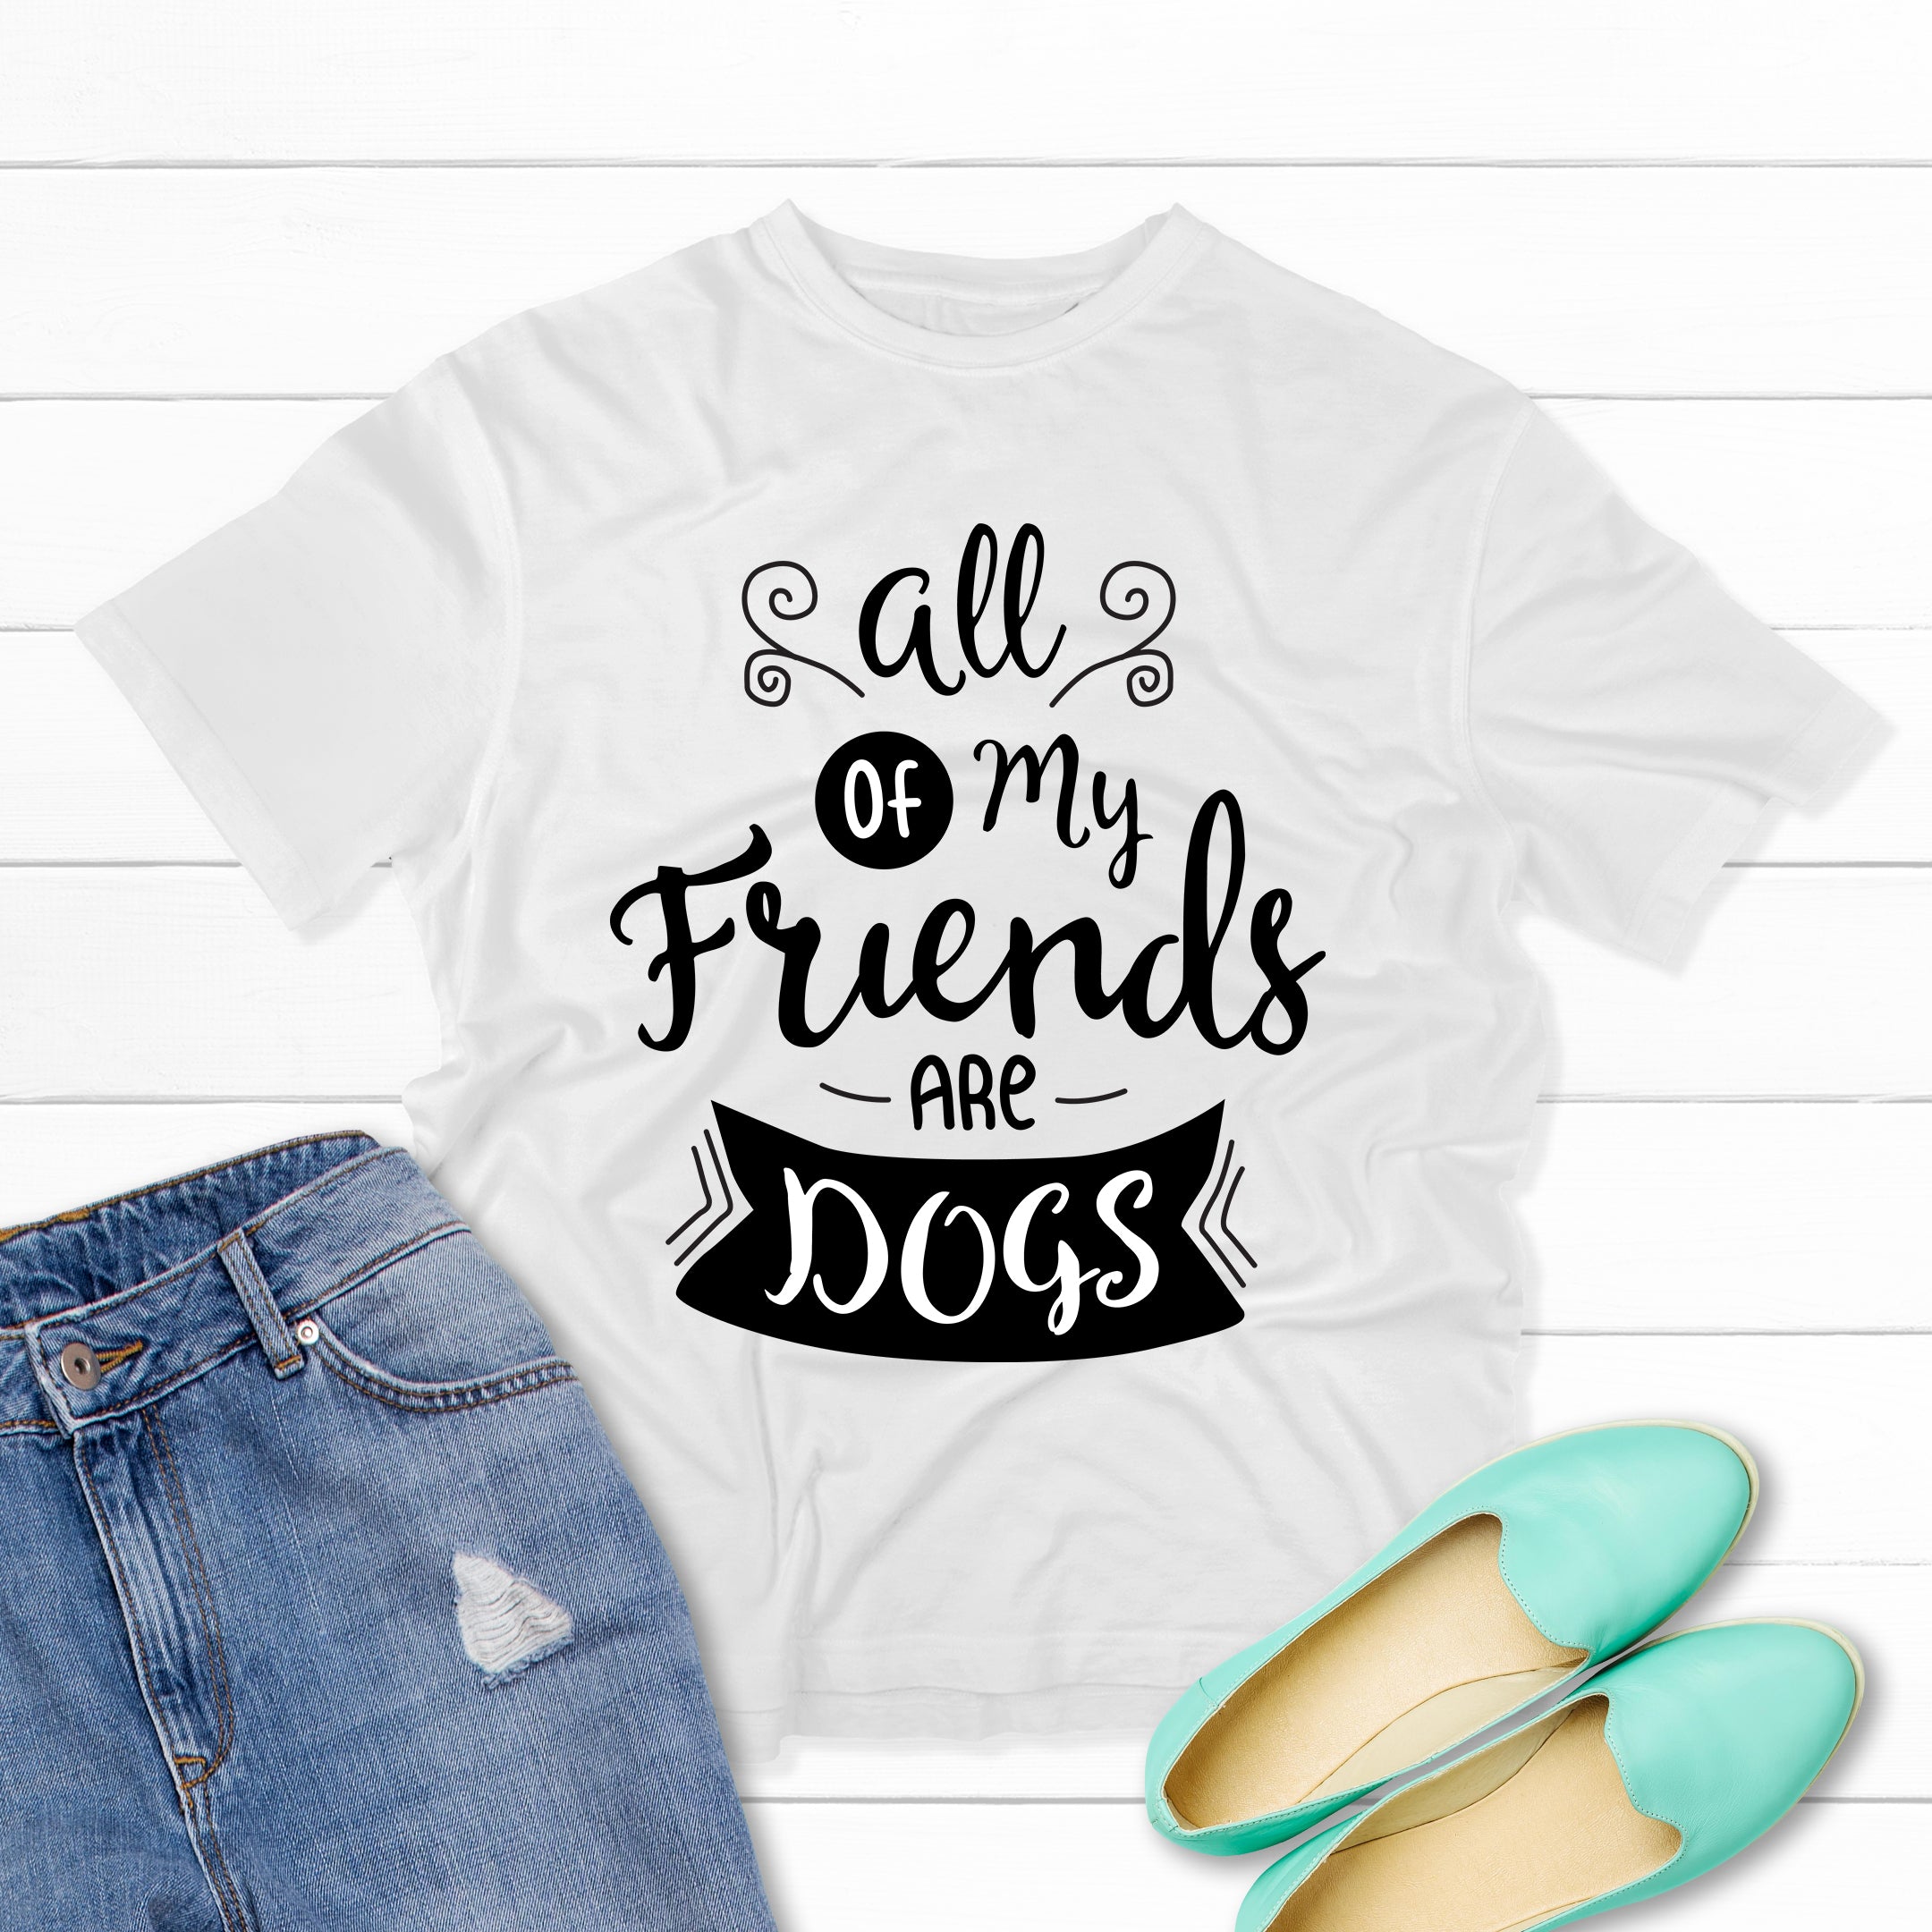 Friends with Dogs